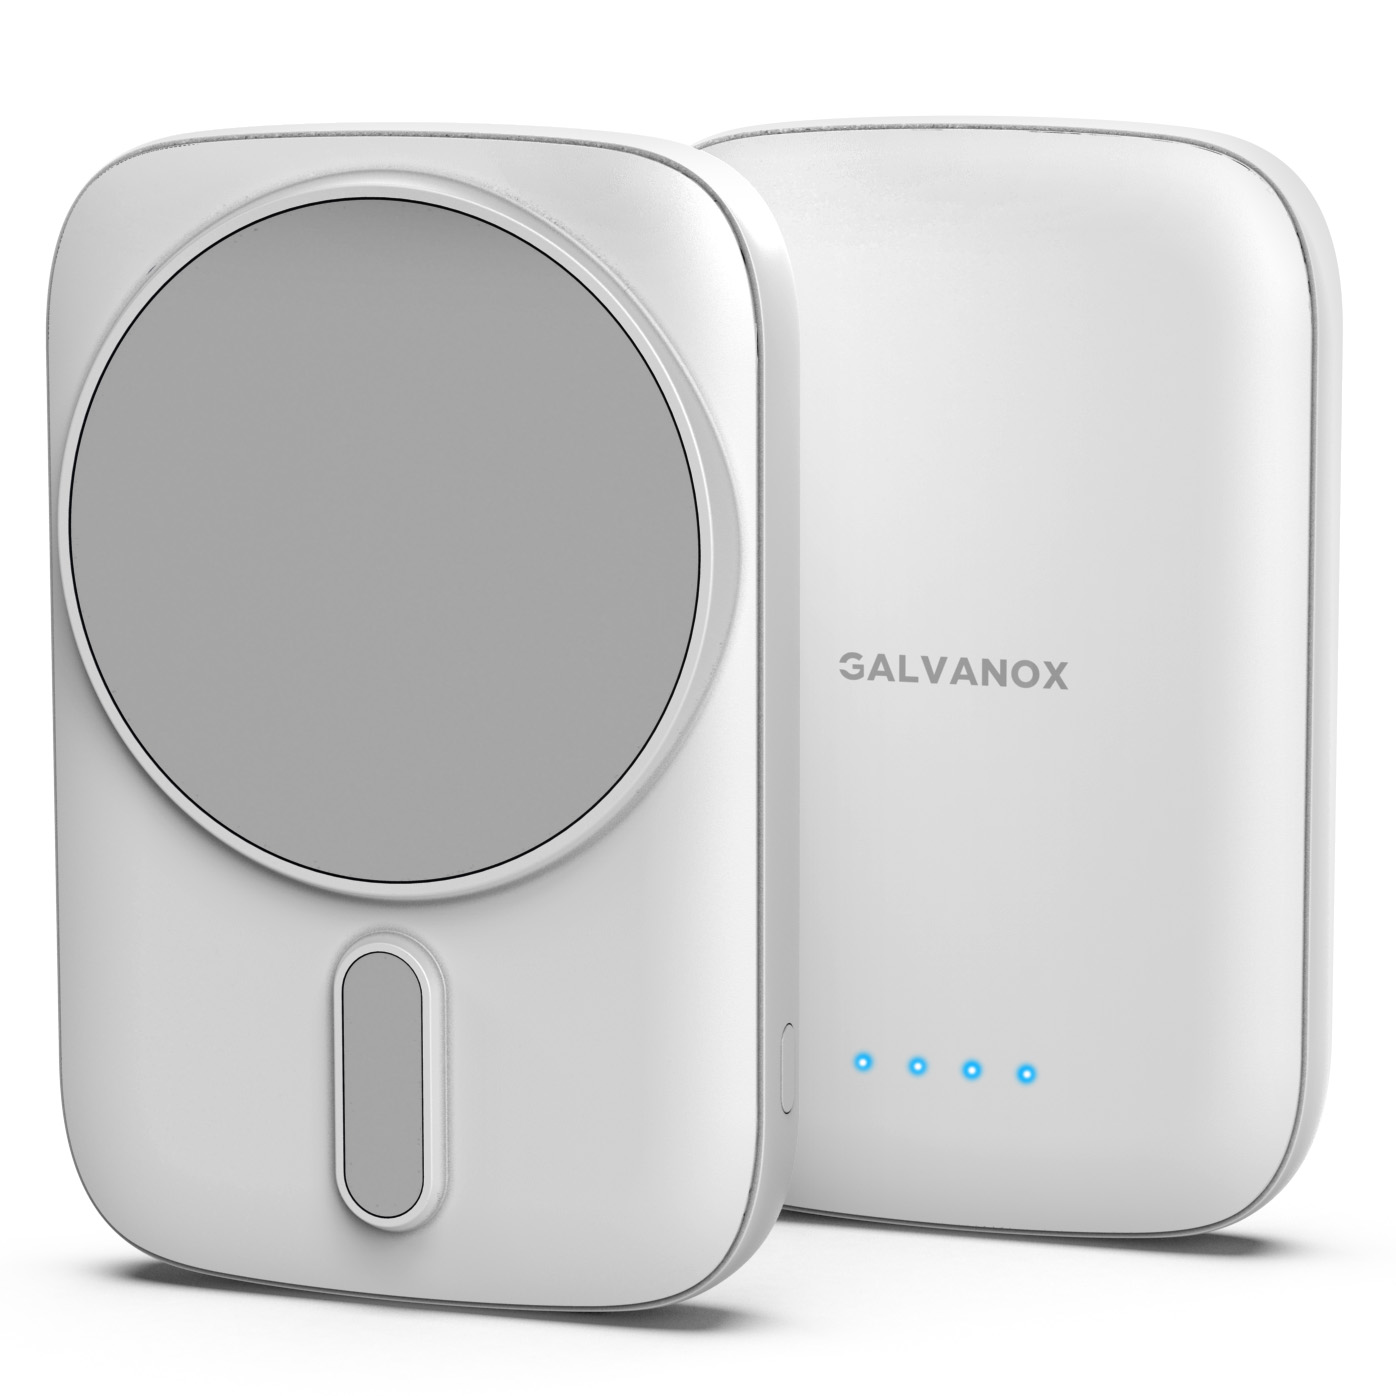 Galvanox MagSafe Powerbank with USB-C Cable in White